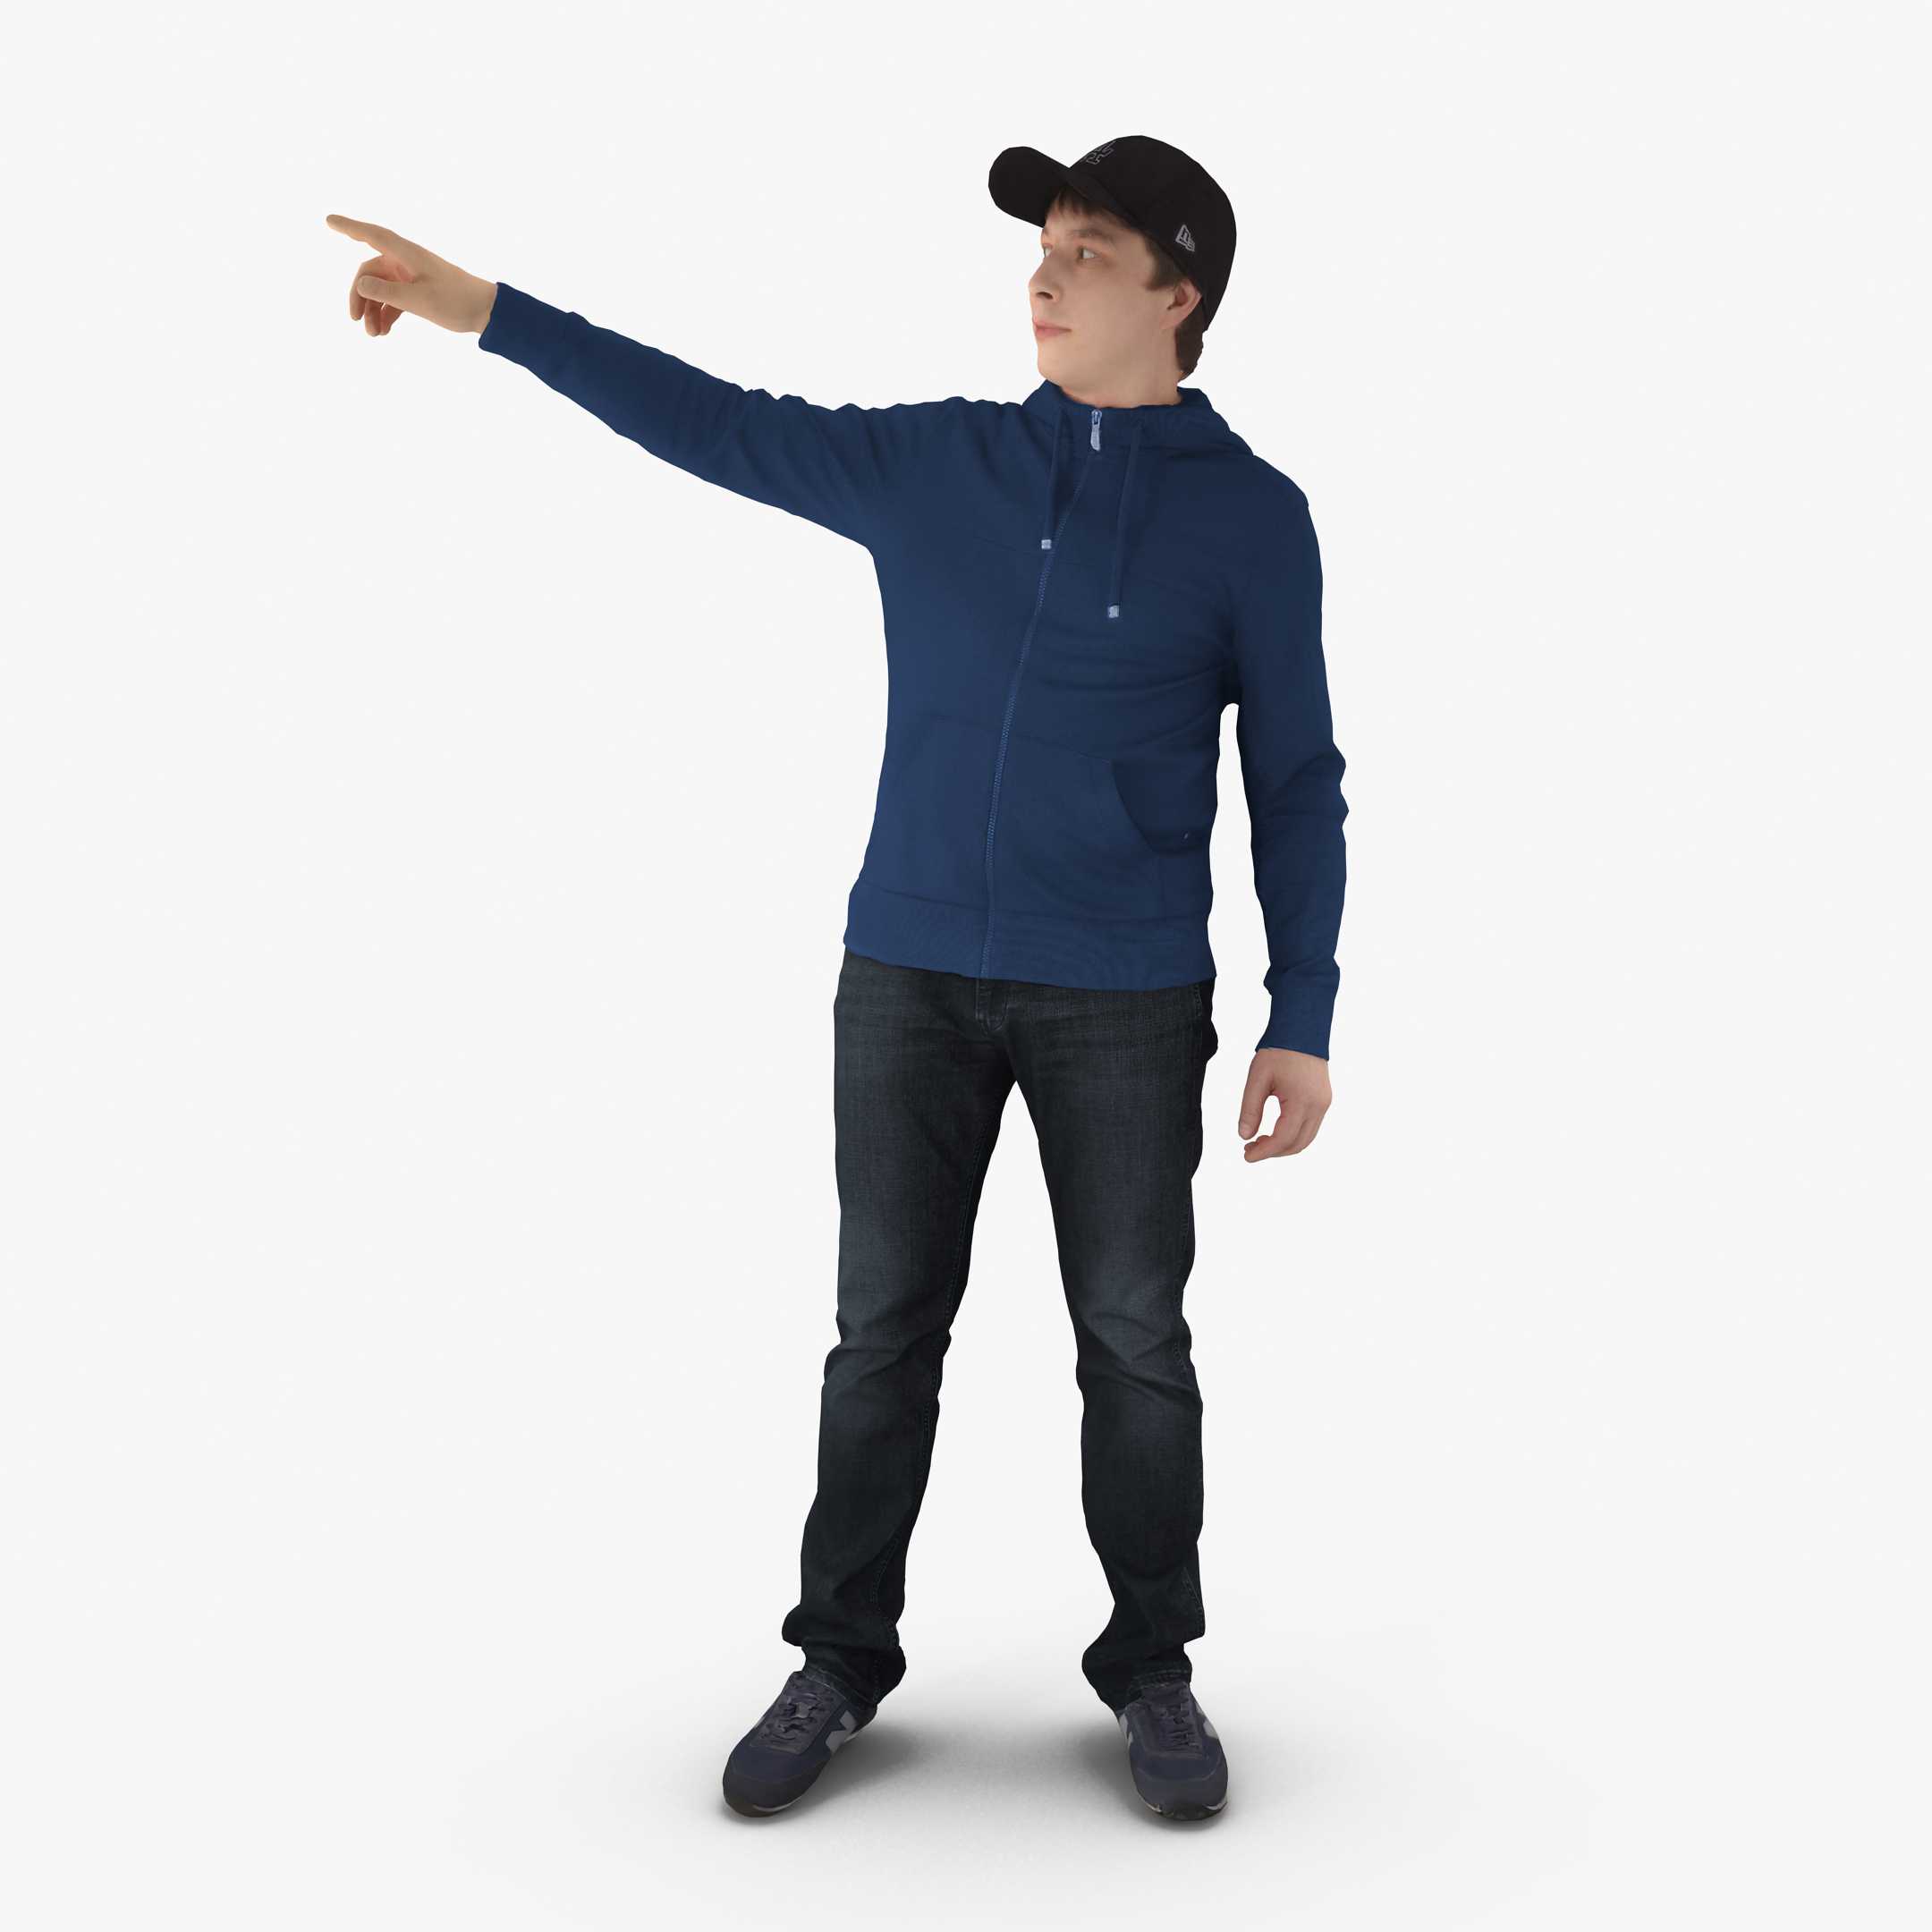 Casual Man Pointing 3D Model